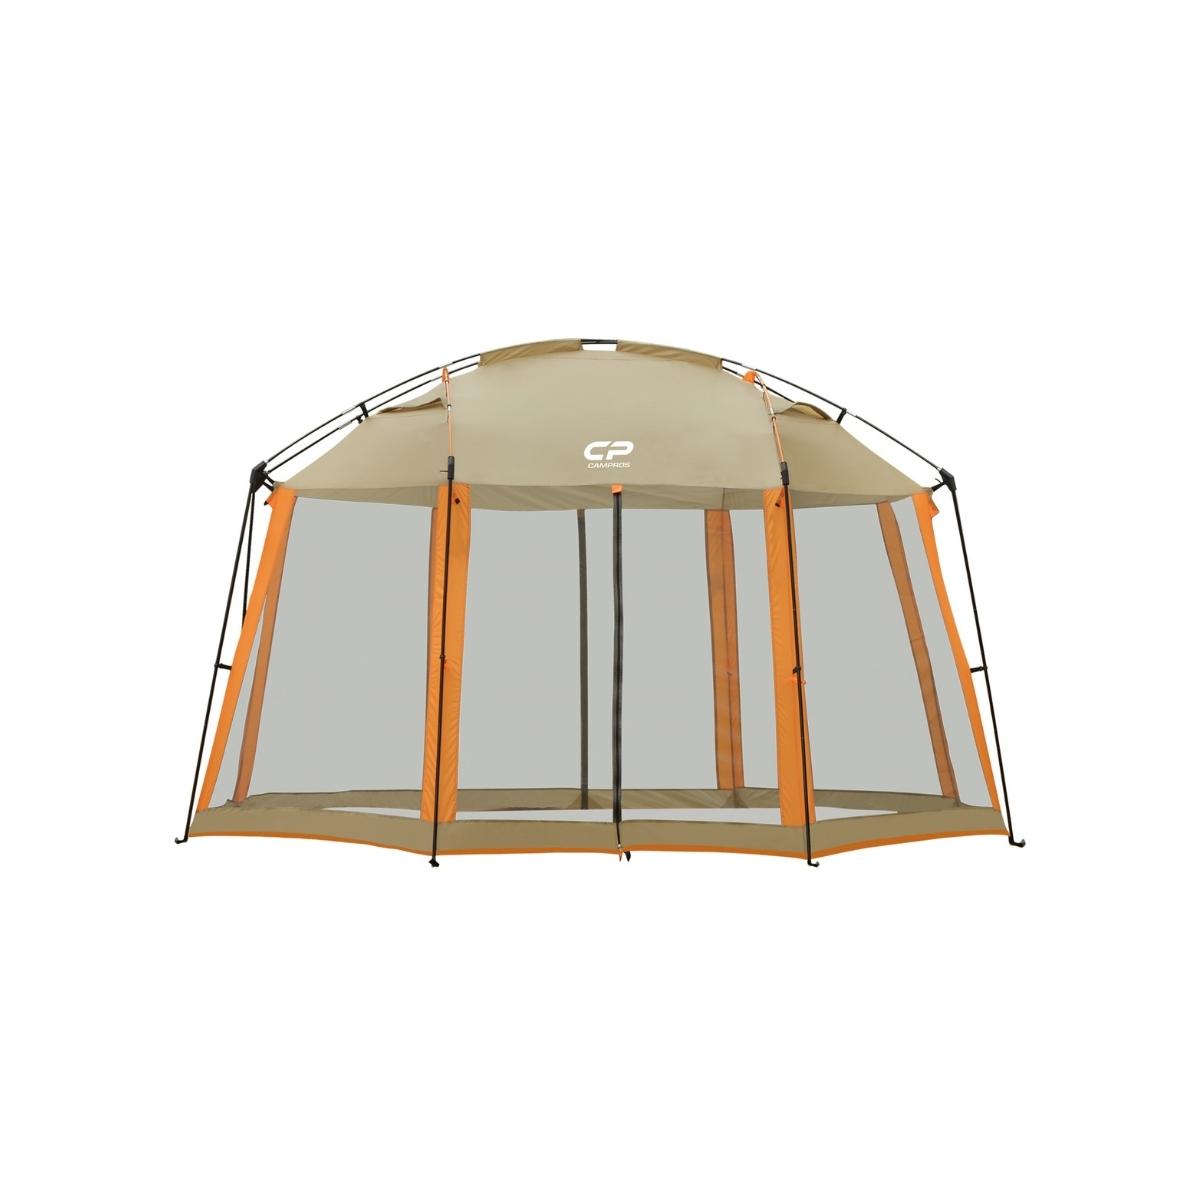 CAMPROS Screen House 13 x 13 Ft Canopy Tent-Canopy Tents-Campros Tent